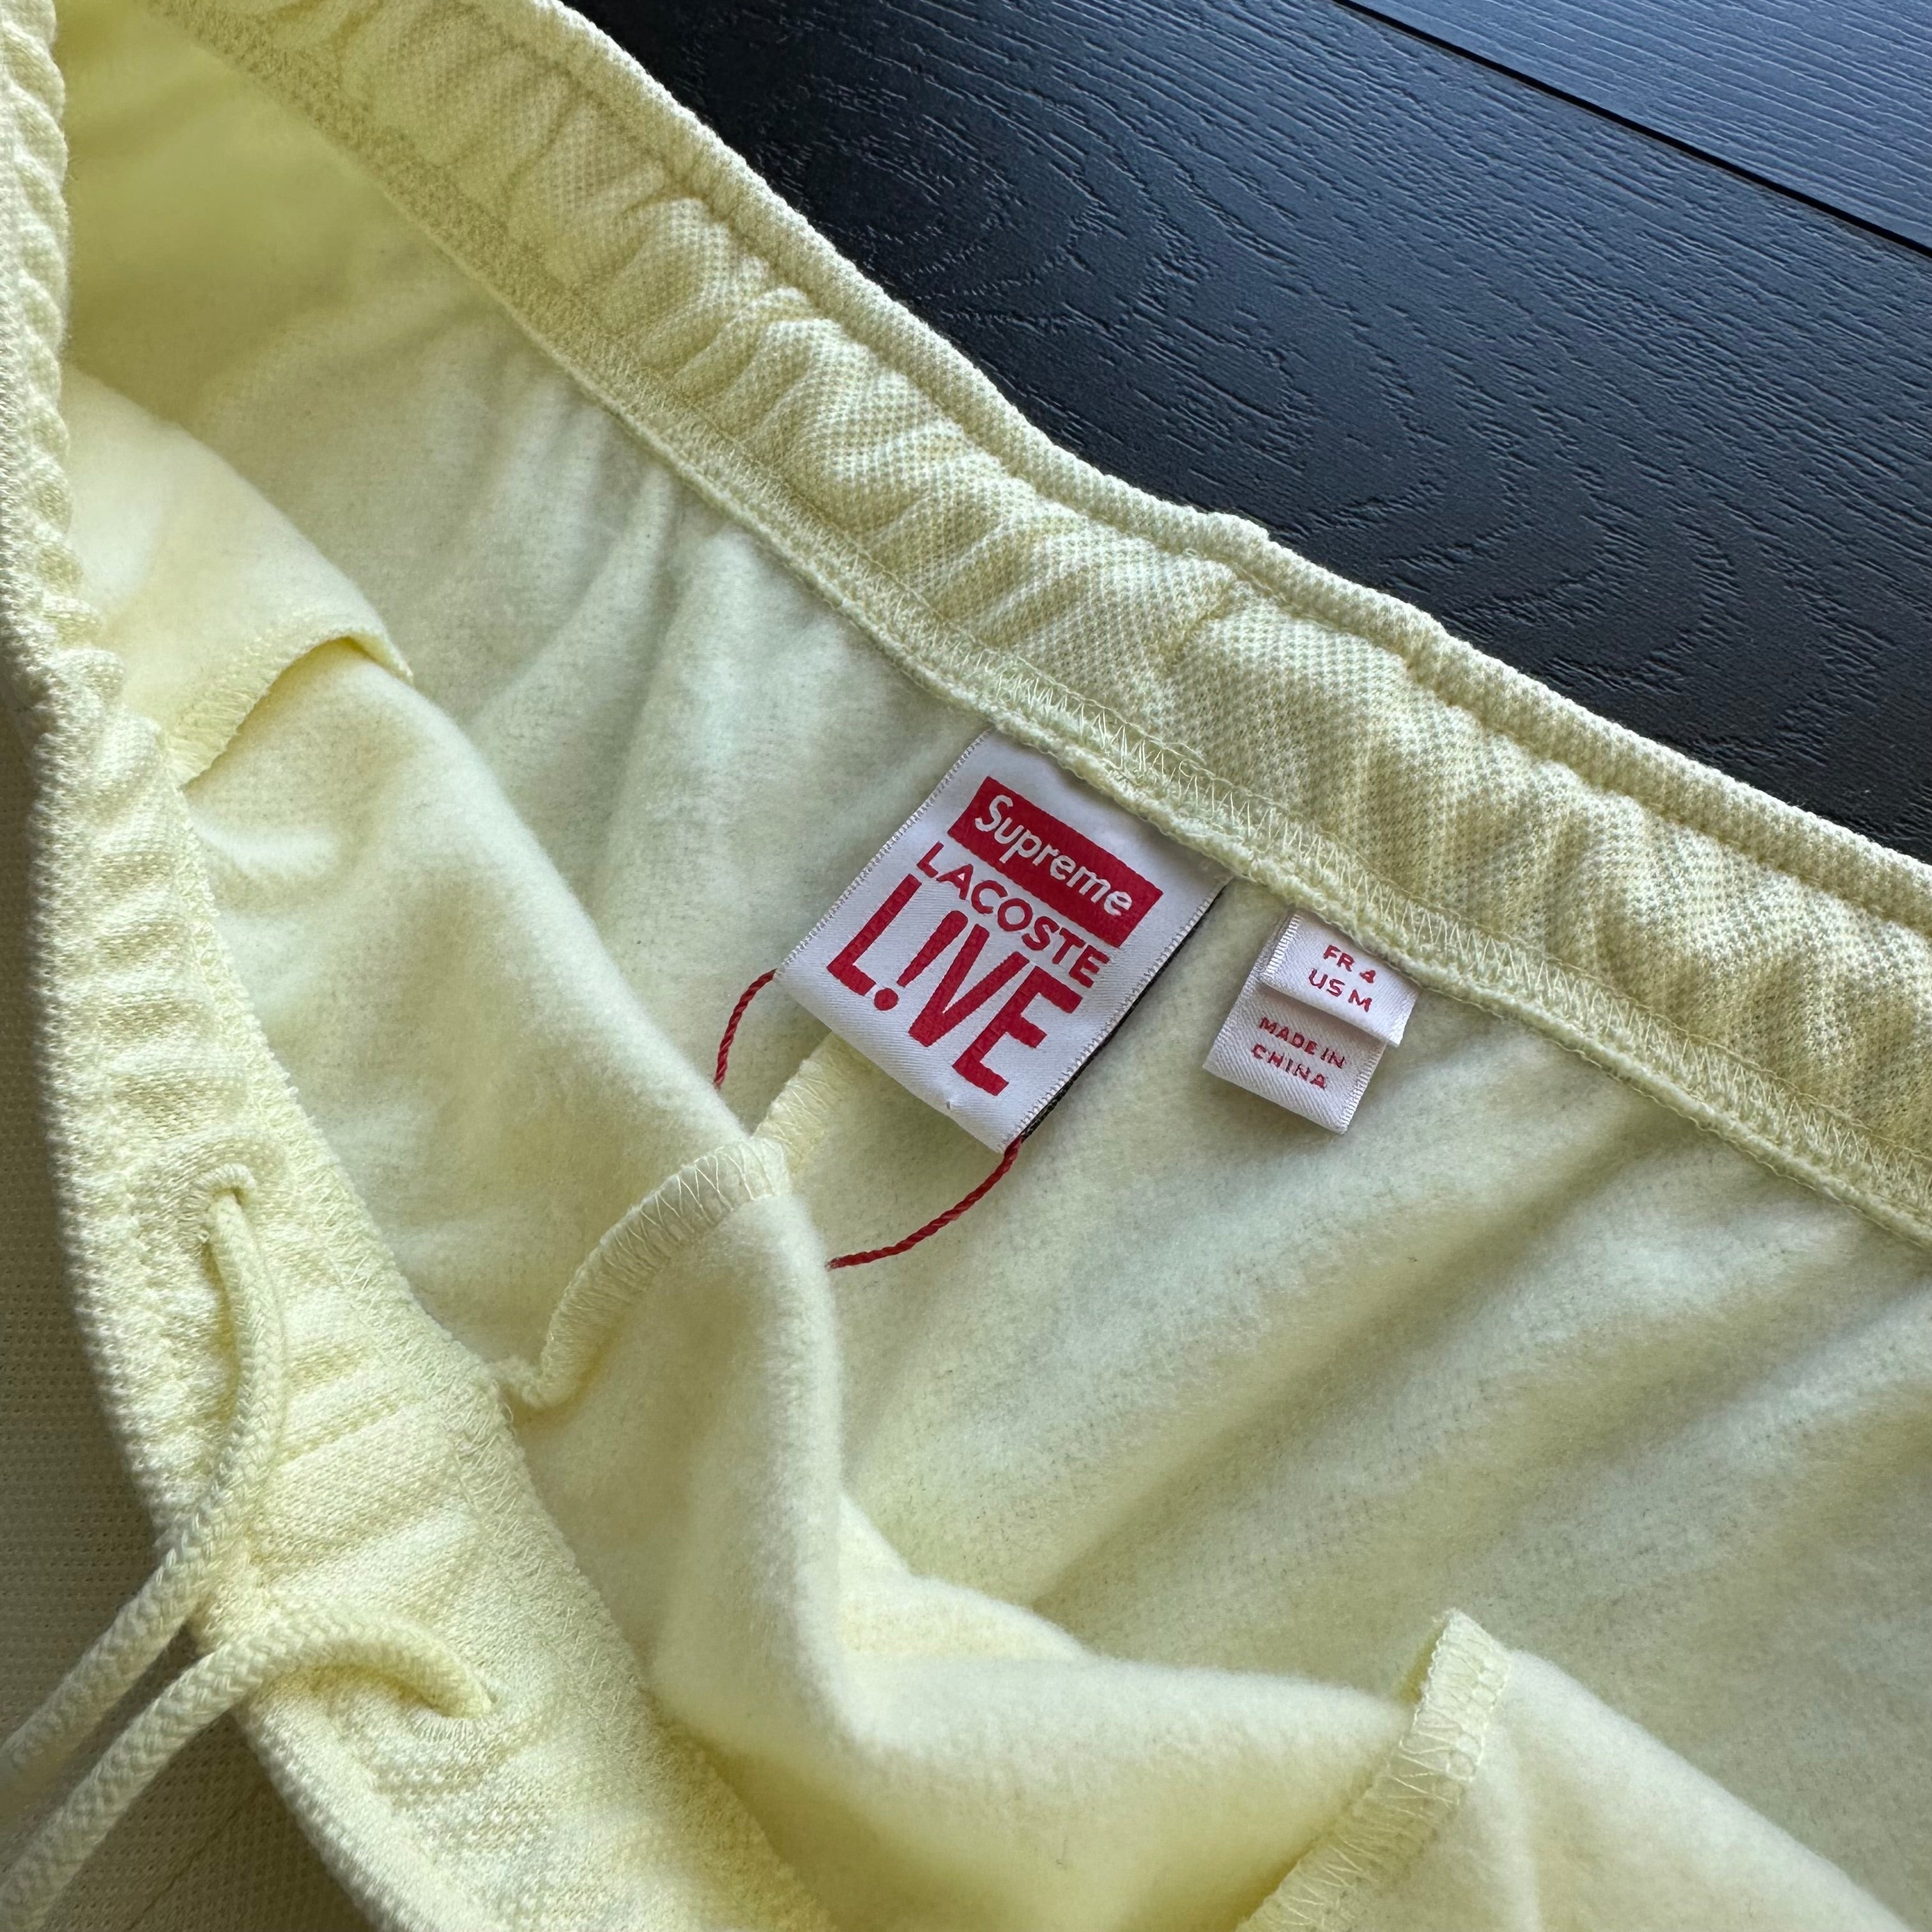 Supreme/Lacoste Pique Shorts – Not Your Father's Gear